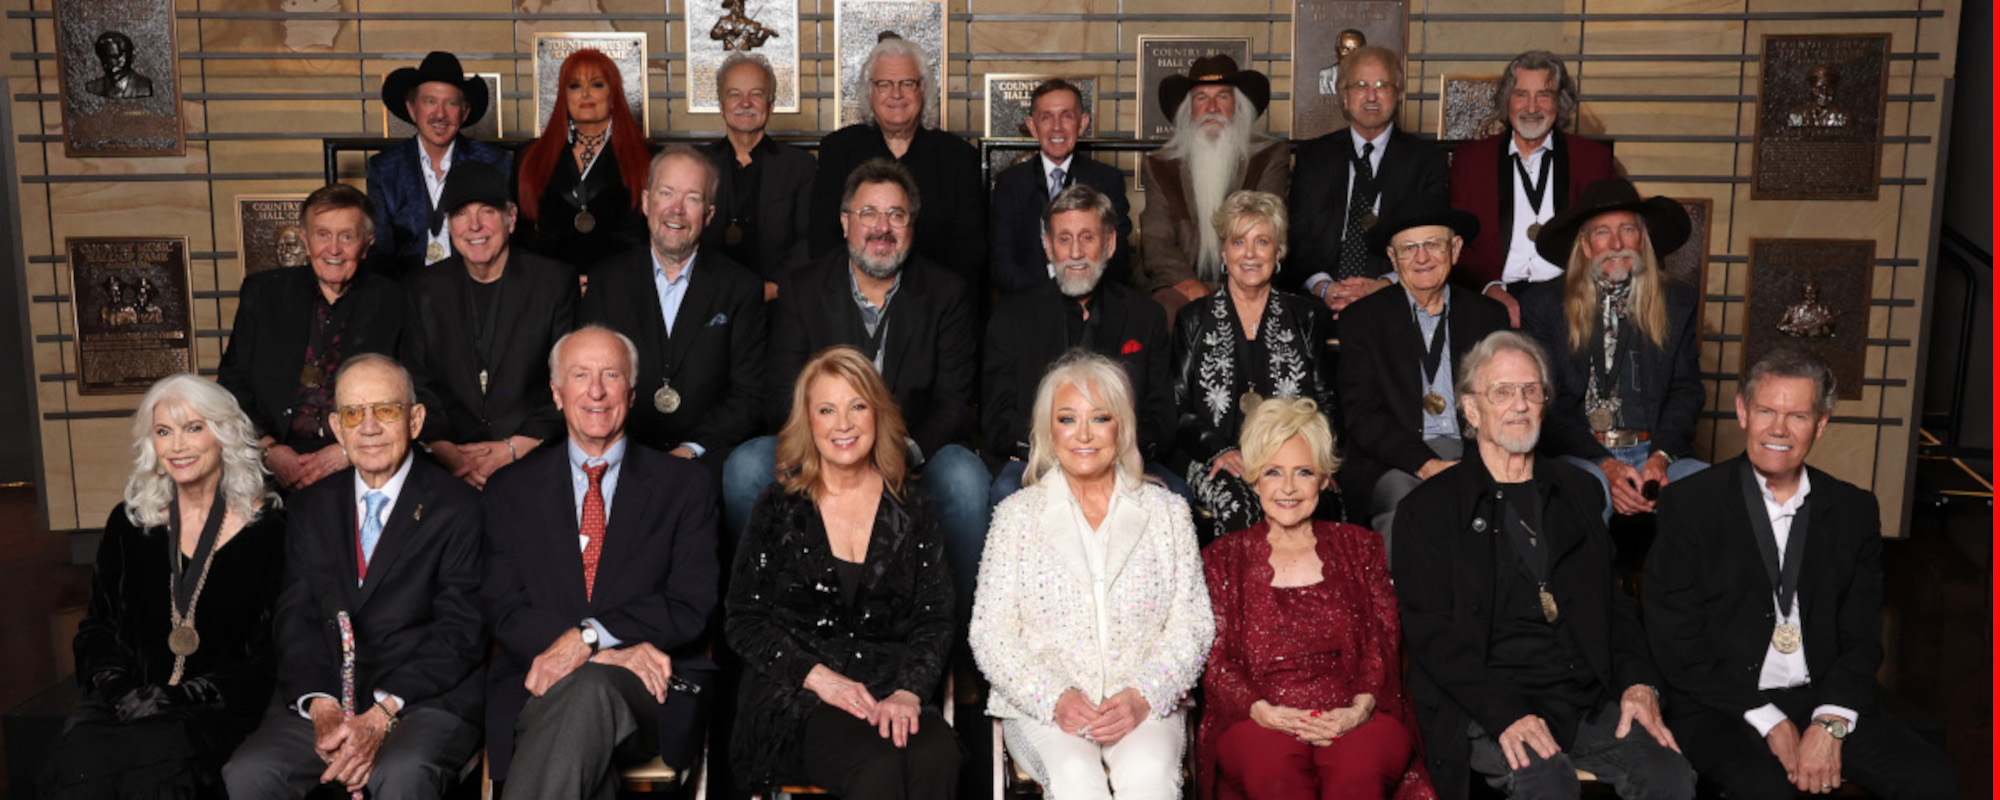 Patty Loveless, Tanya Tucker, and Bob McDill Inducted into the Country Music Hall of Fame; See Photos from the Big Night